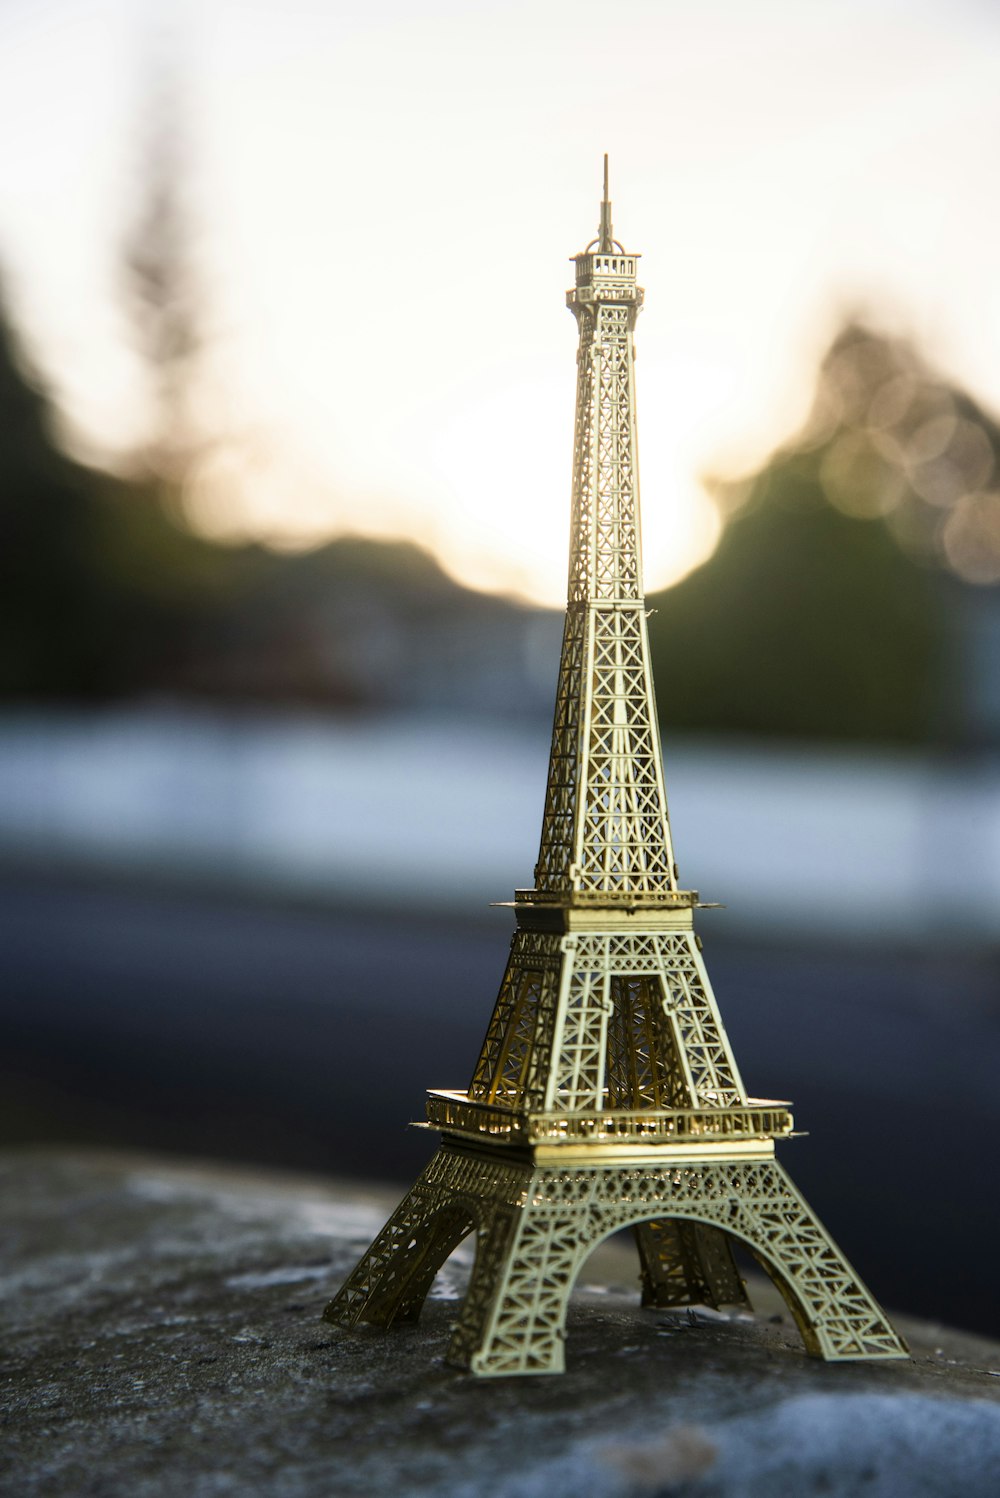 1080p Images: Eiffel Tower Images For Dp Download